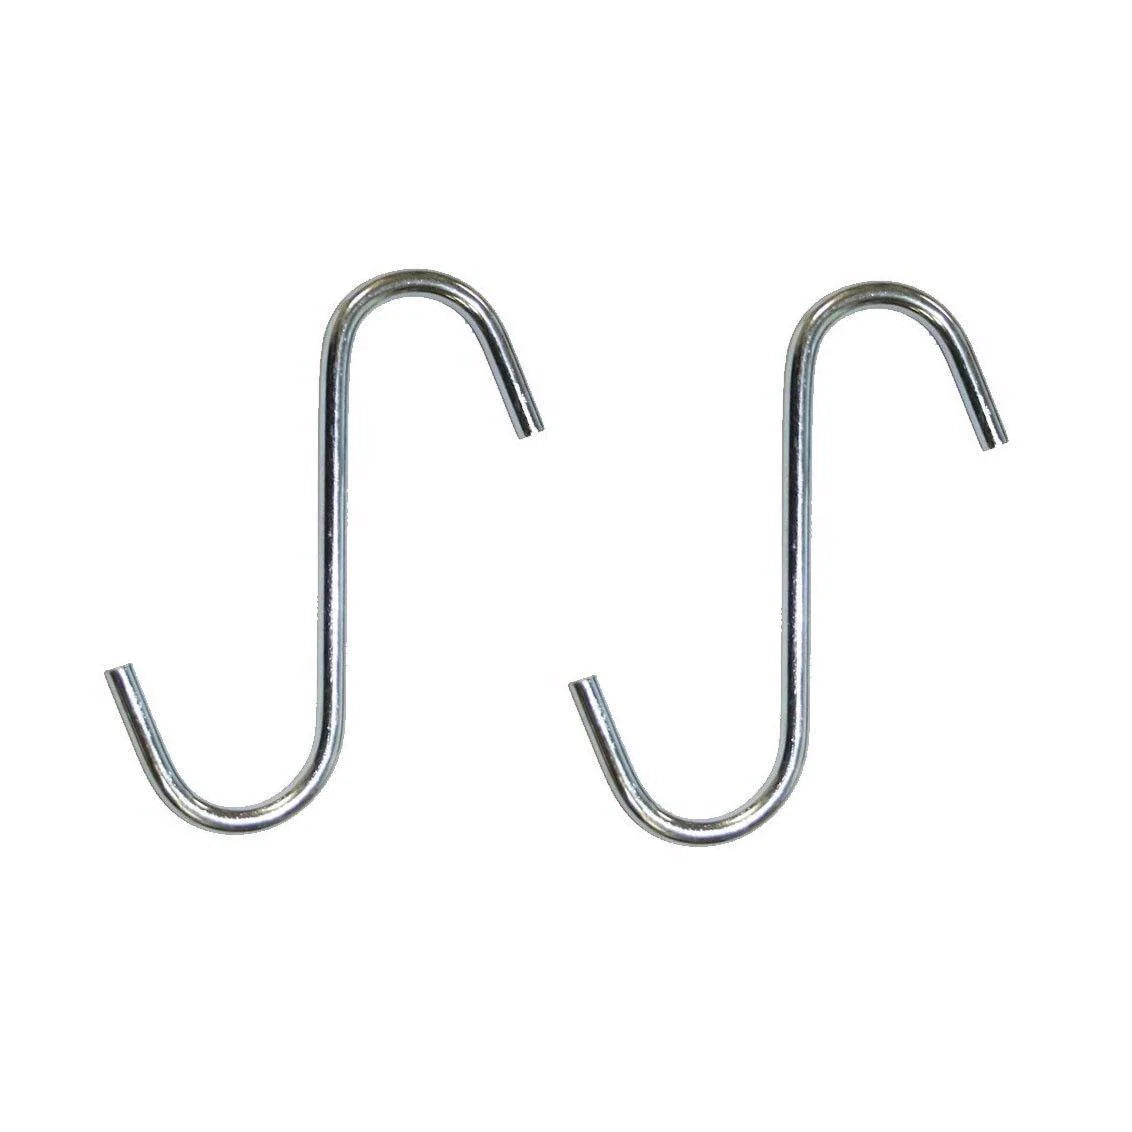 Value Pack 'S' Hooks 100mm Zinc Plated Pack Of 2